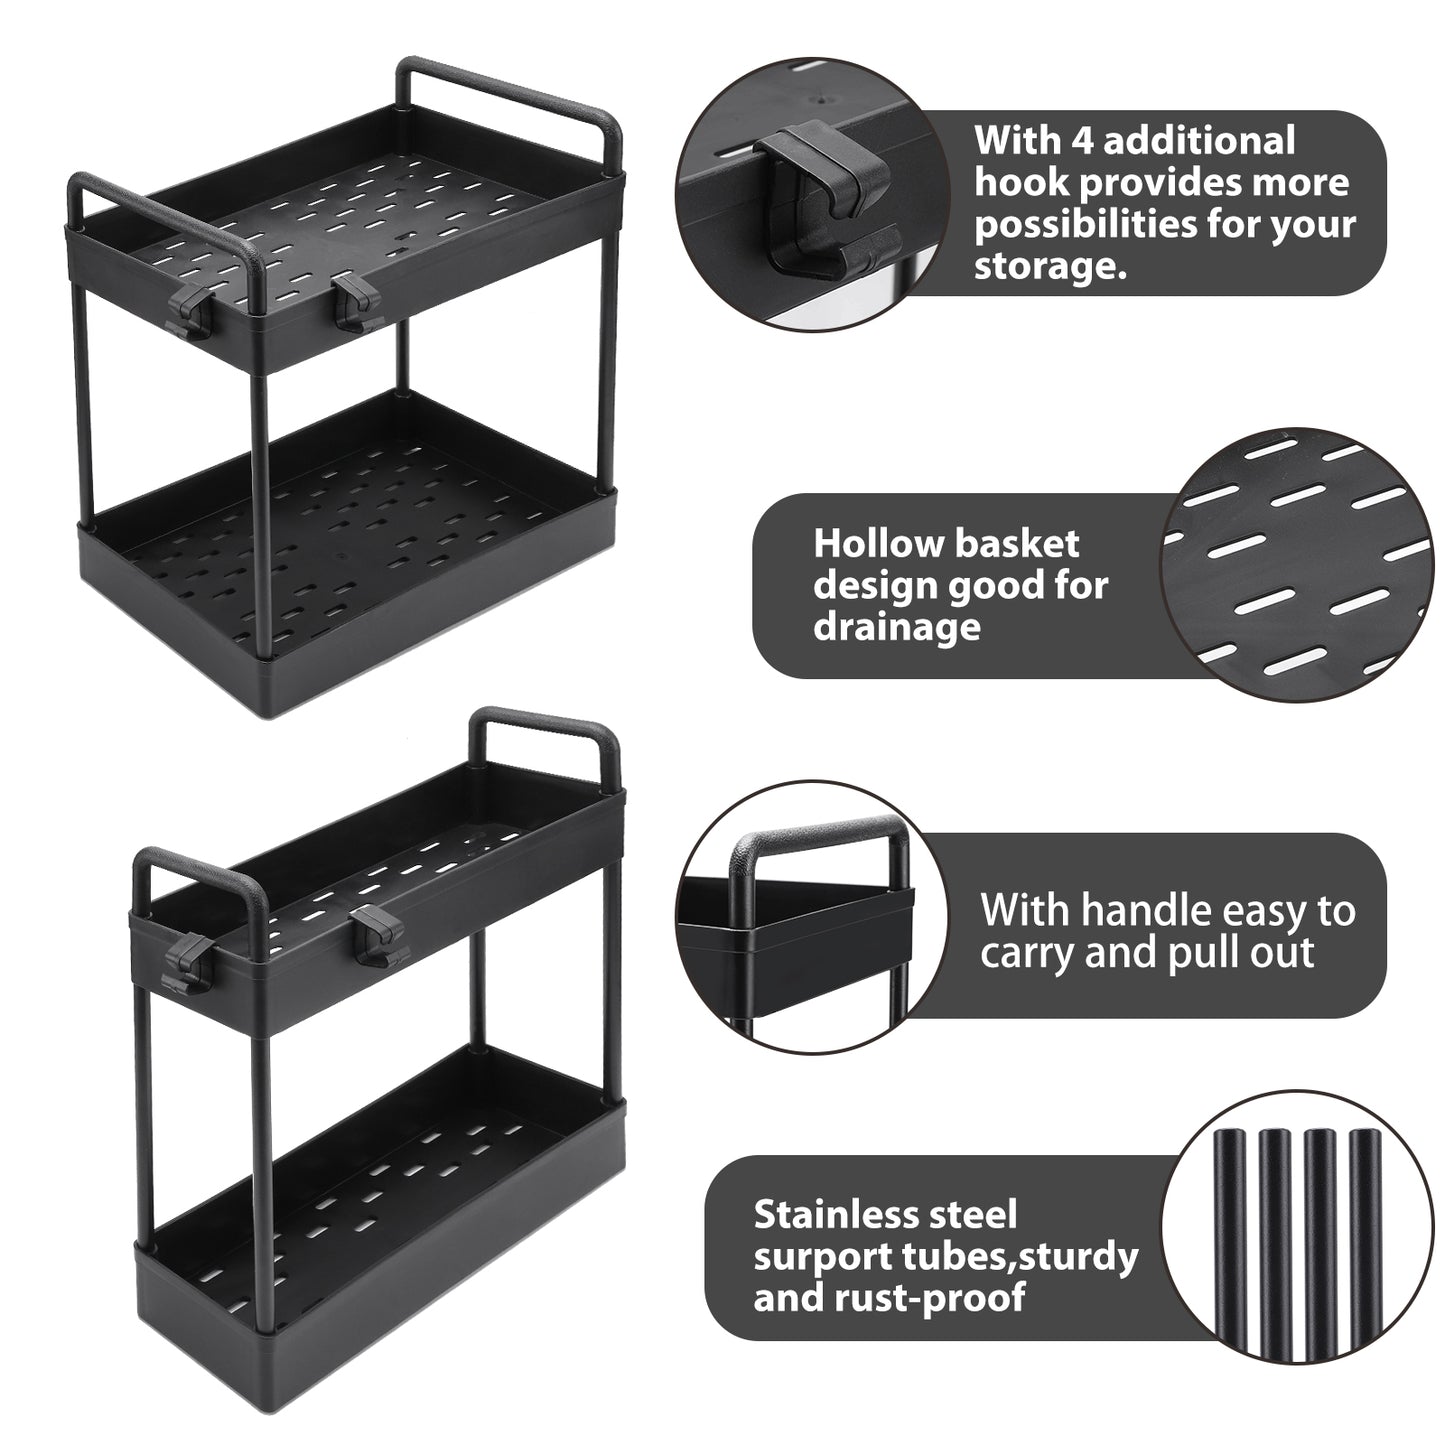 2pcs Under Sink Organizers and Storage,Black Under Sink Organizer,2 Tier Kitchen Cabinet Sink Organizer with Hooks for Home Kitchen Bathroom